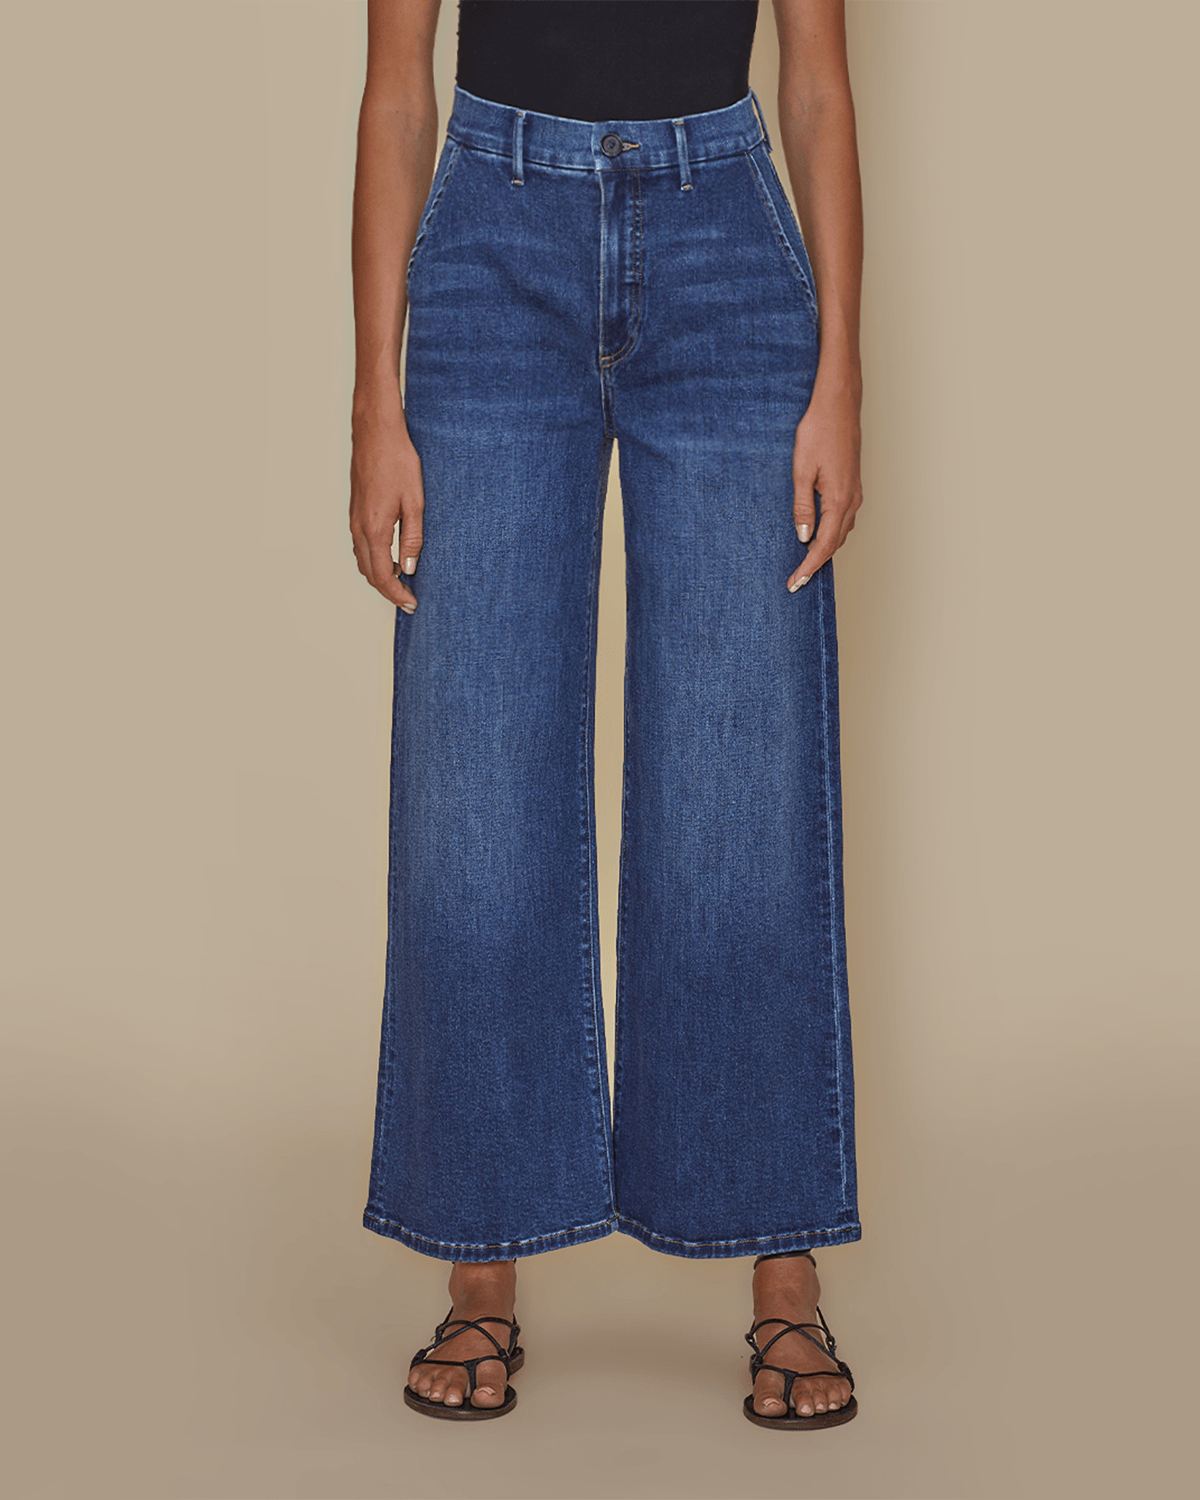 LE JEAN Jude Trouser Ankle in Libertine